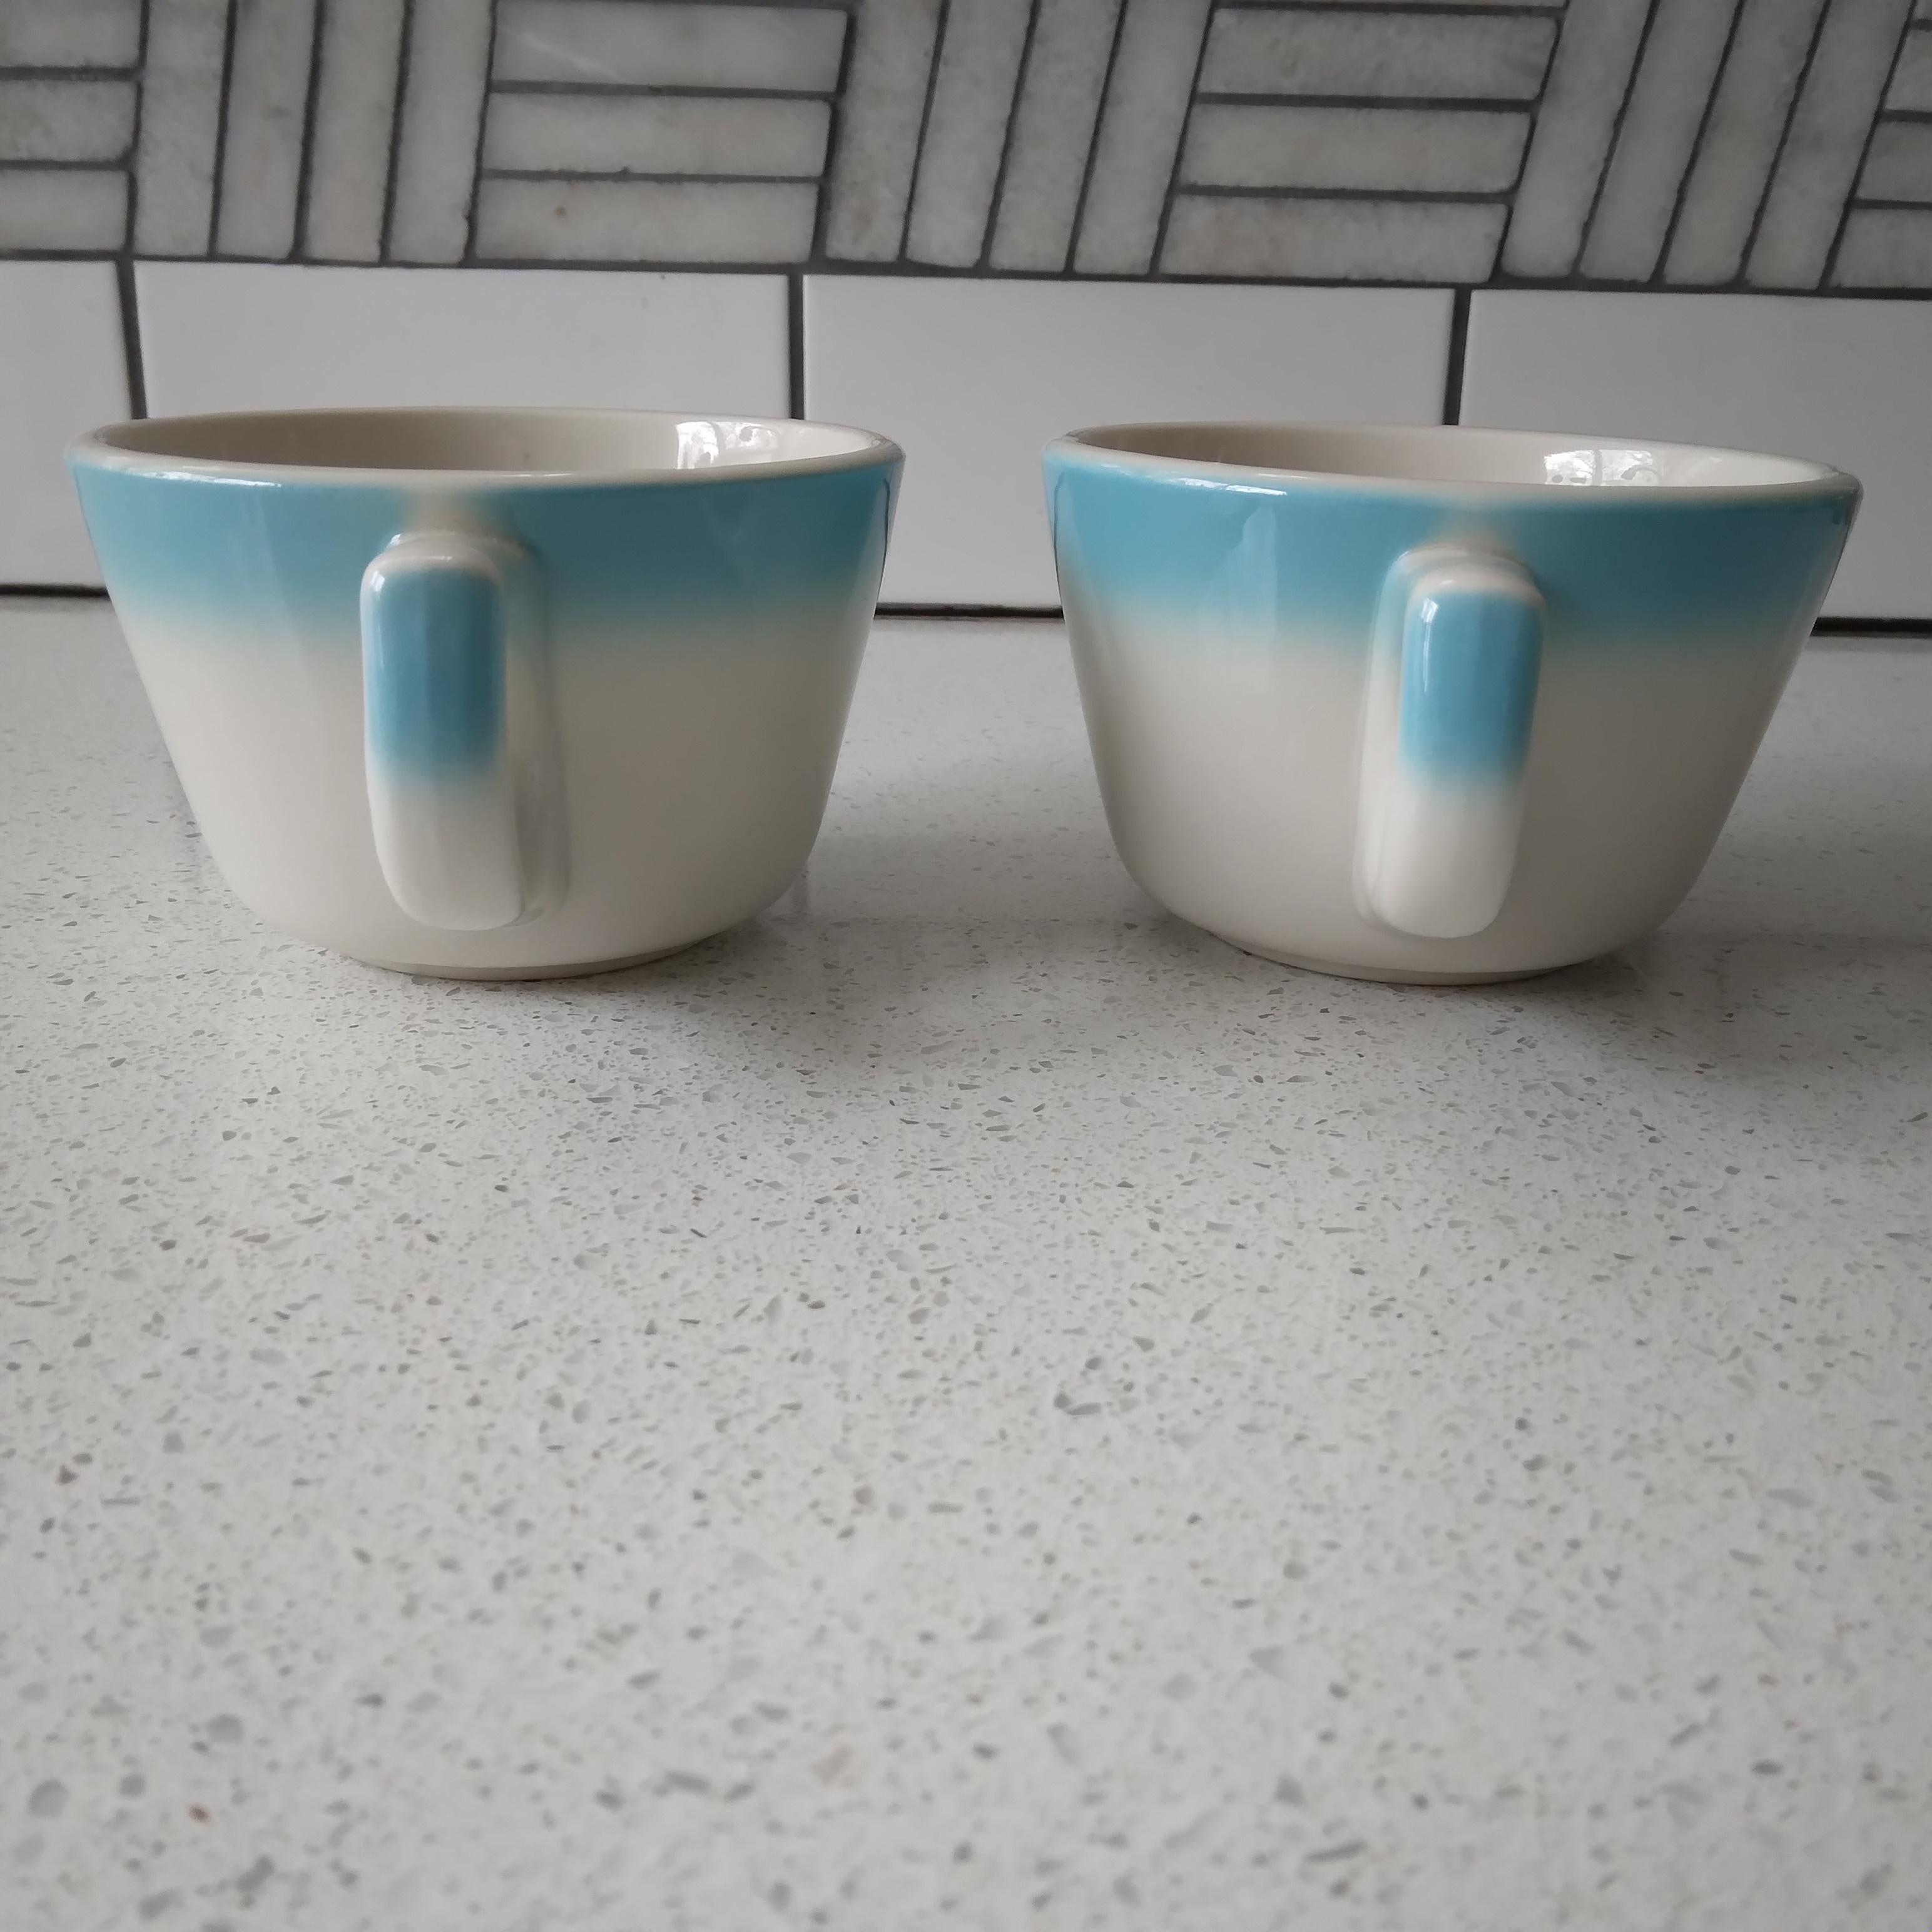 Vintage Buffalo China Tea Cup Pair in Sky Blue and Off White In Good Condition For Sale In Munster, IN